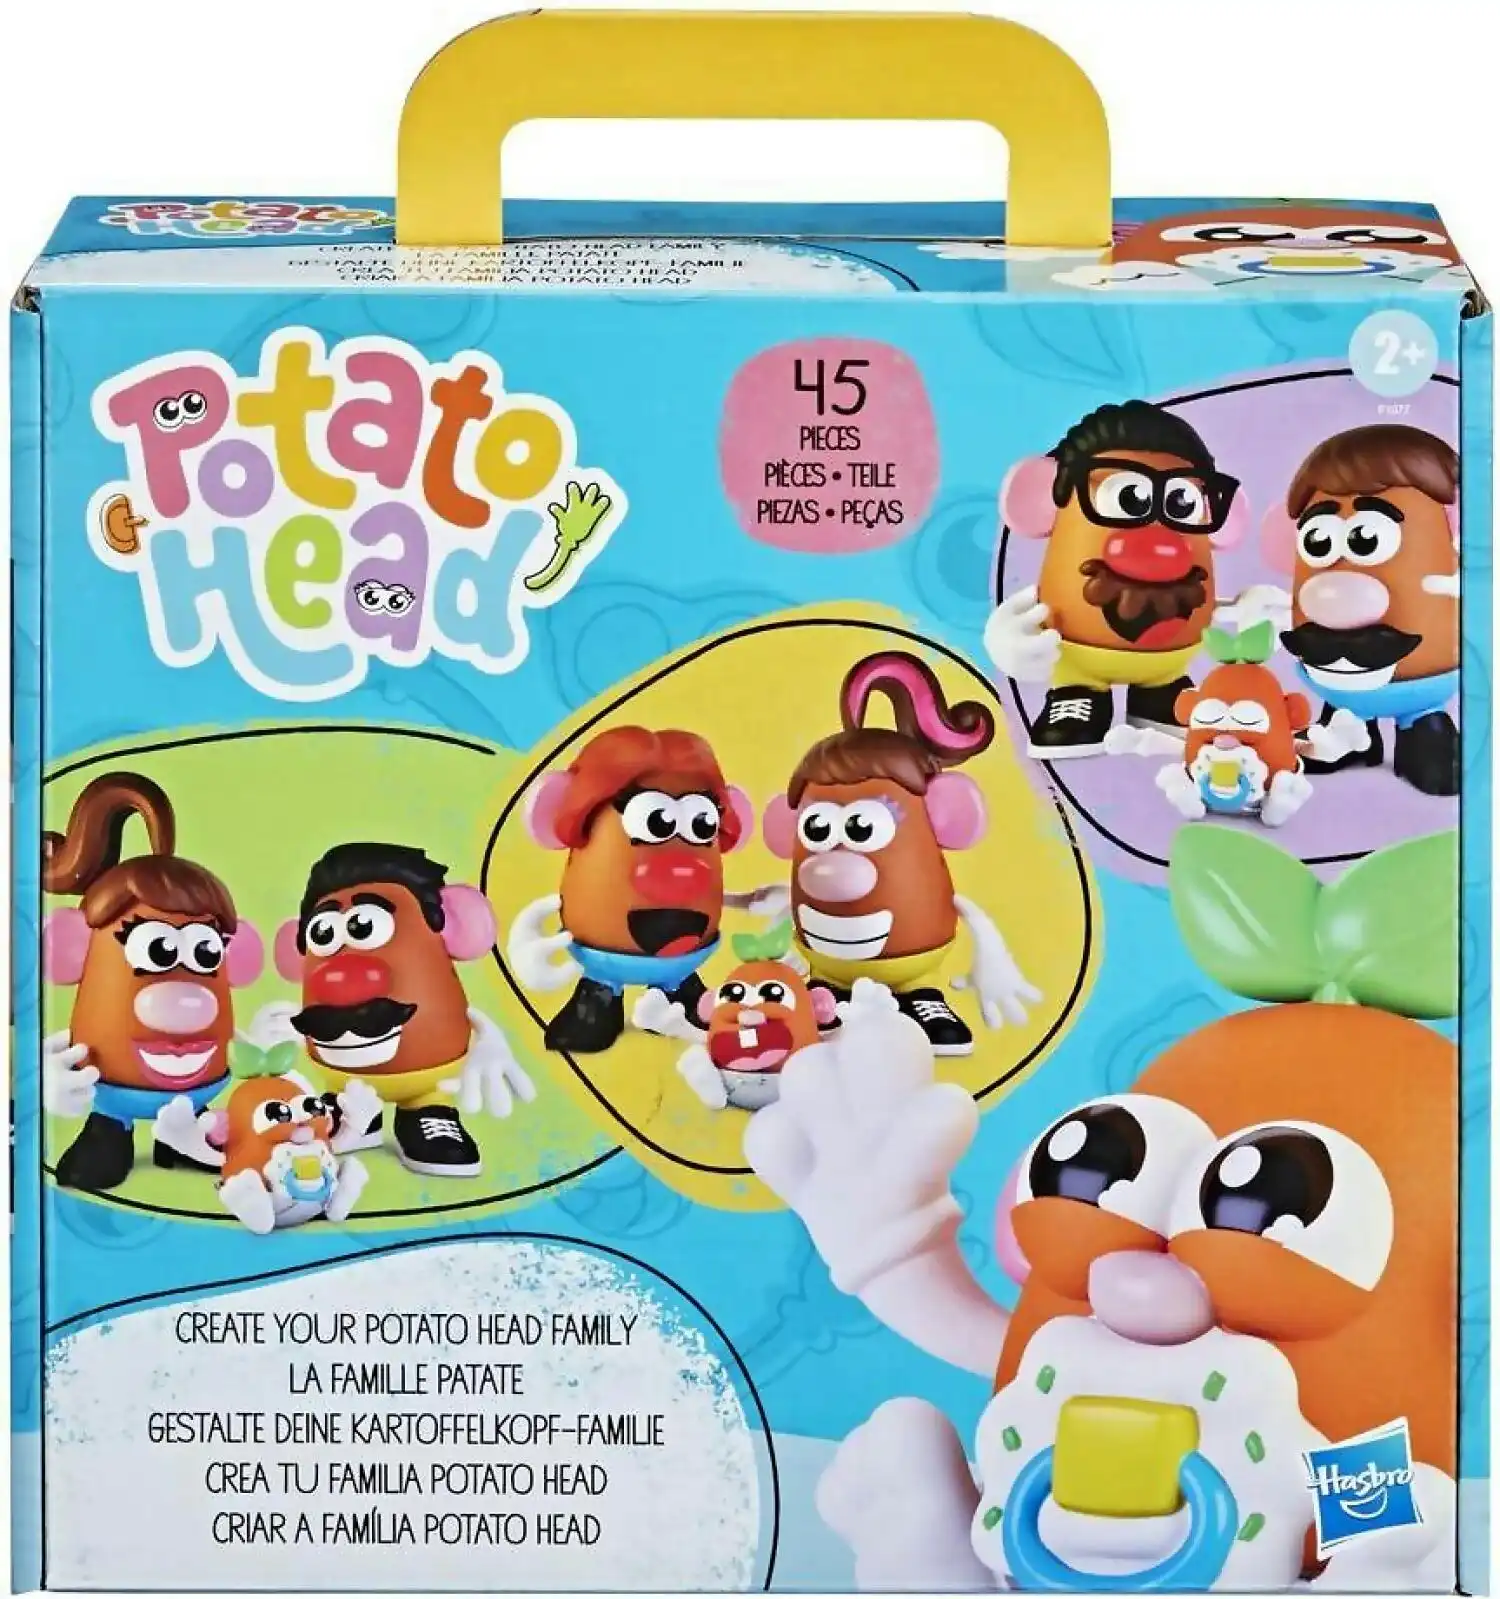 Potato Head - Create Your Potato Head Family Toy For Kids Ages 2 And Up With 45 Pieces To Customize Potato Families